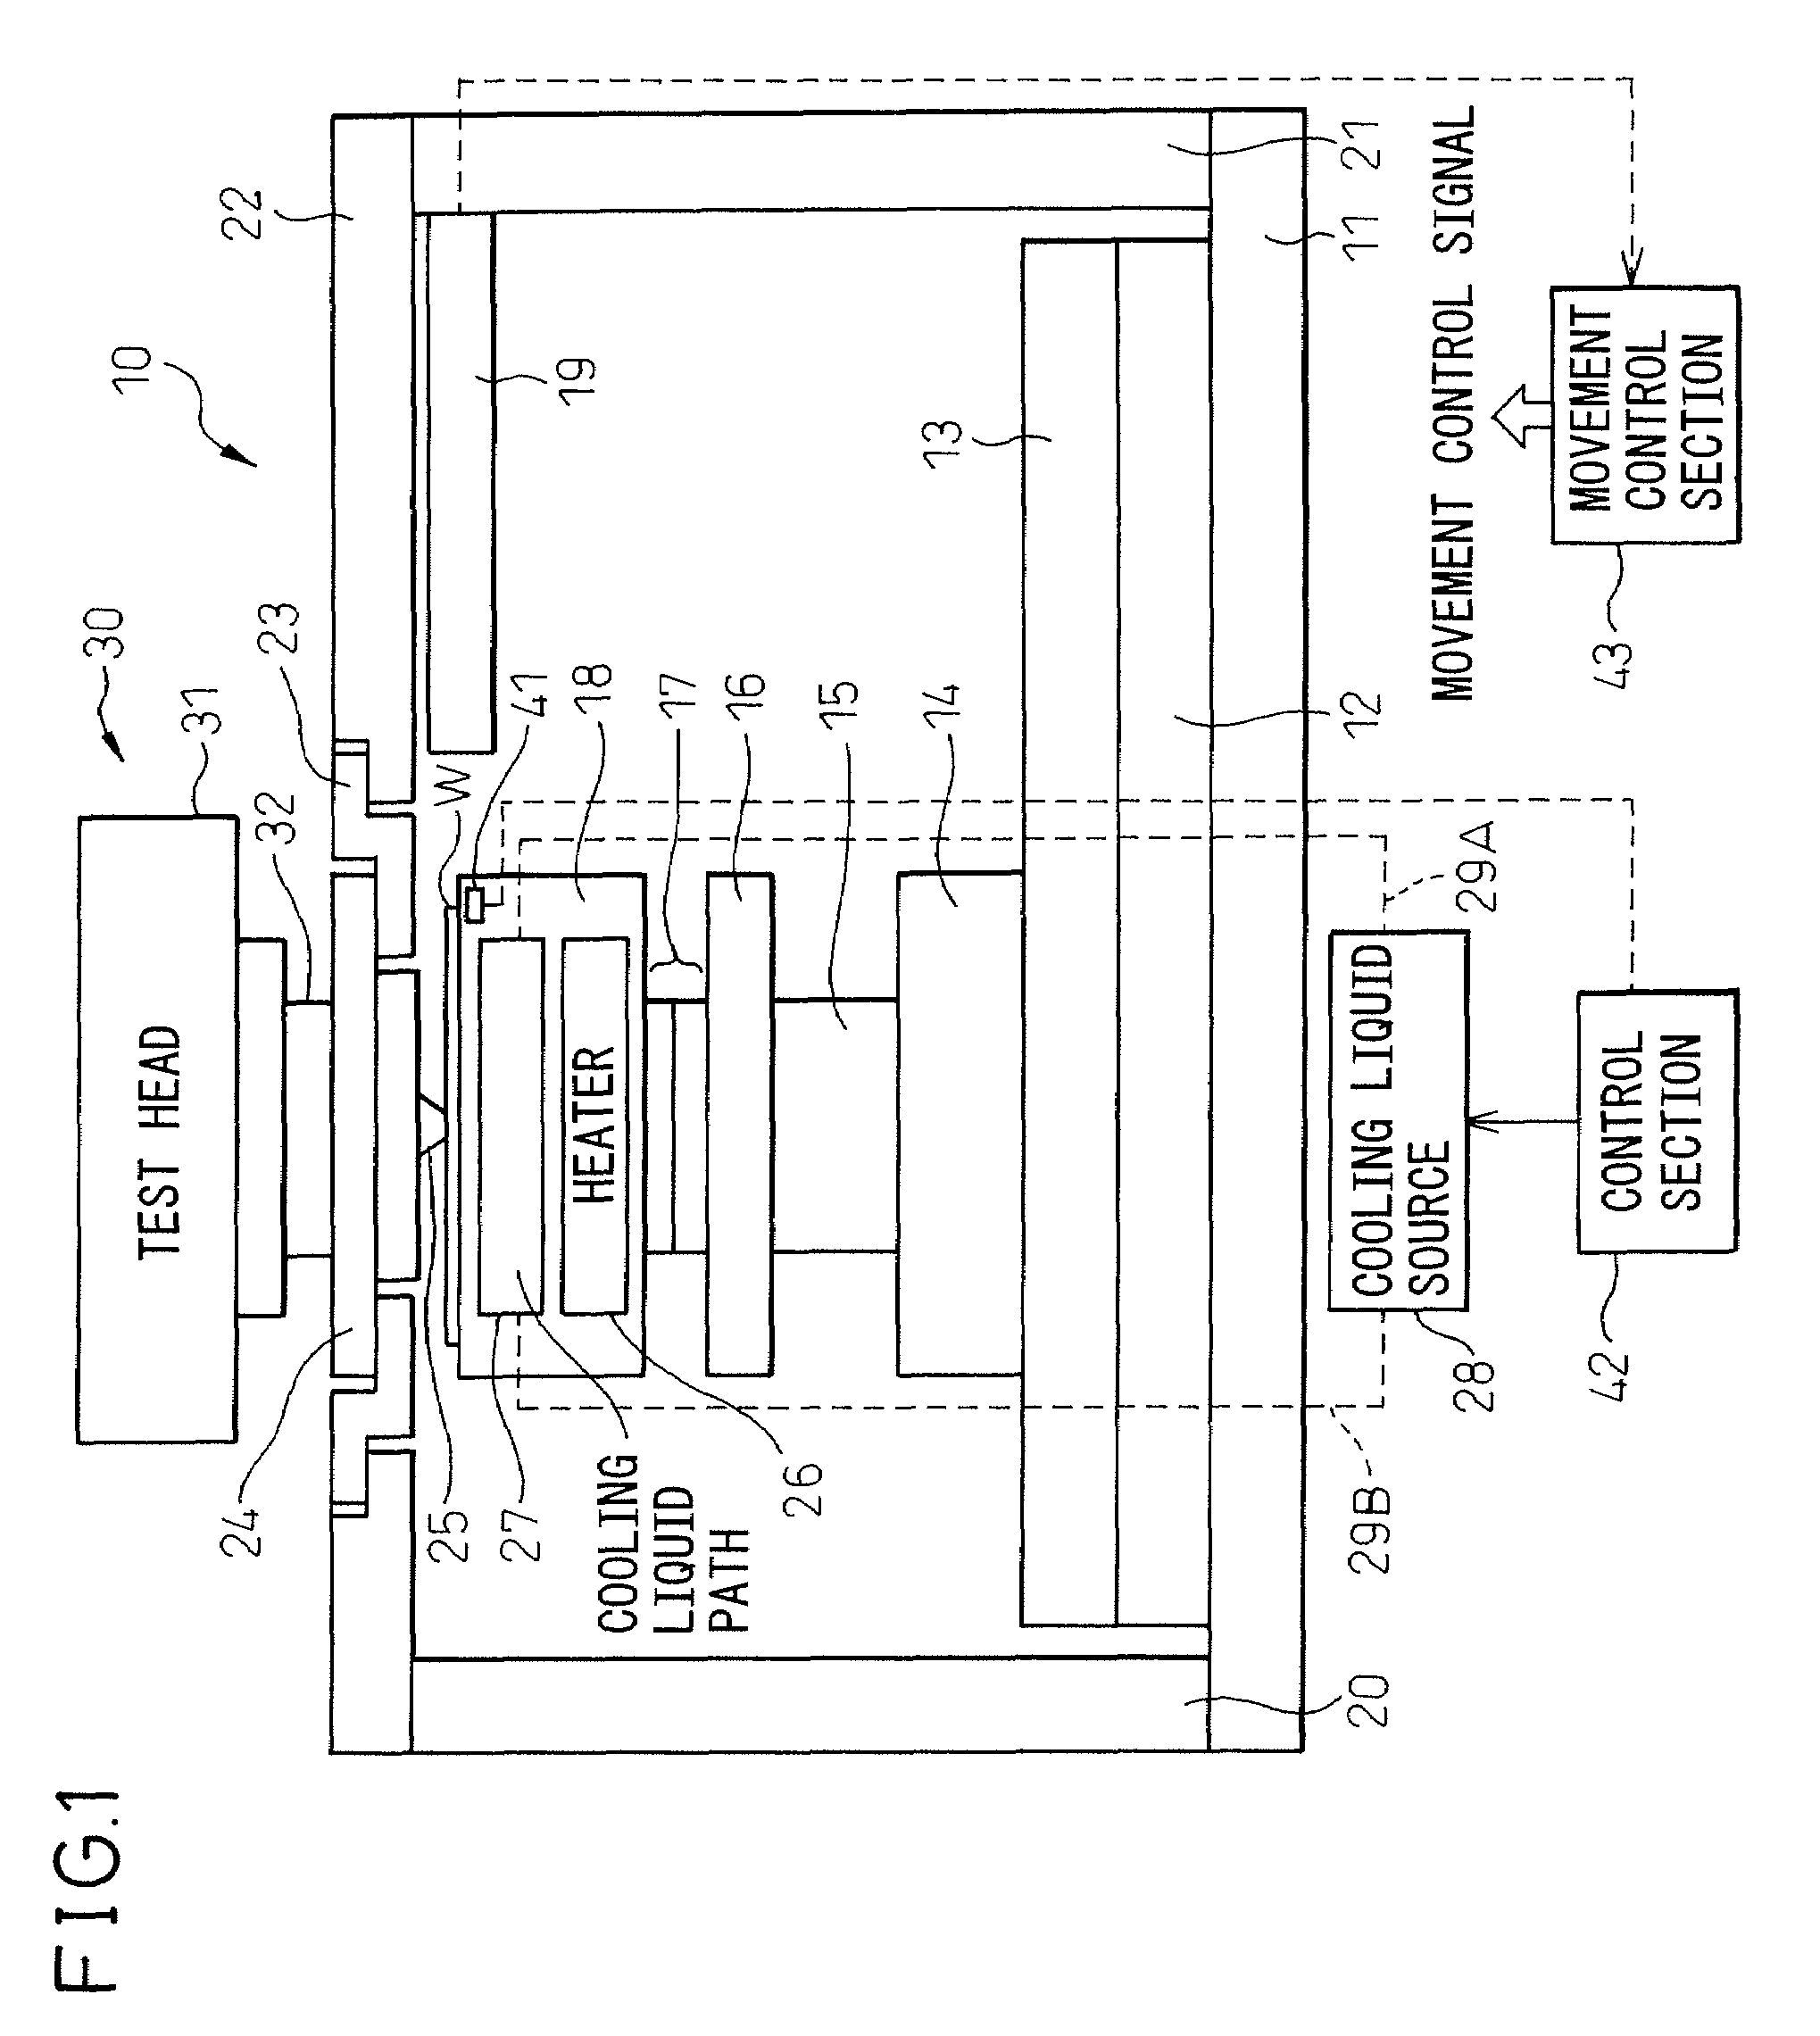 Prober and probe contact method